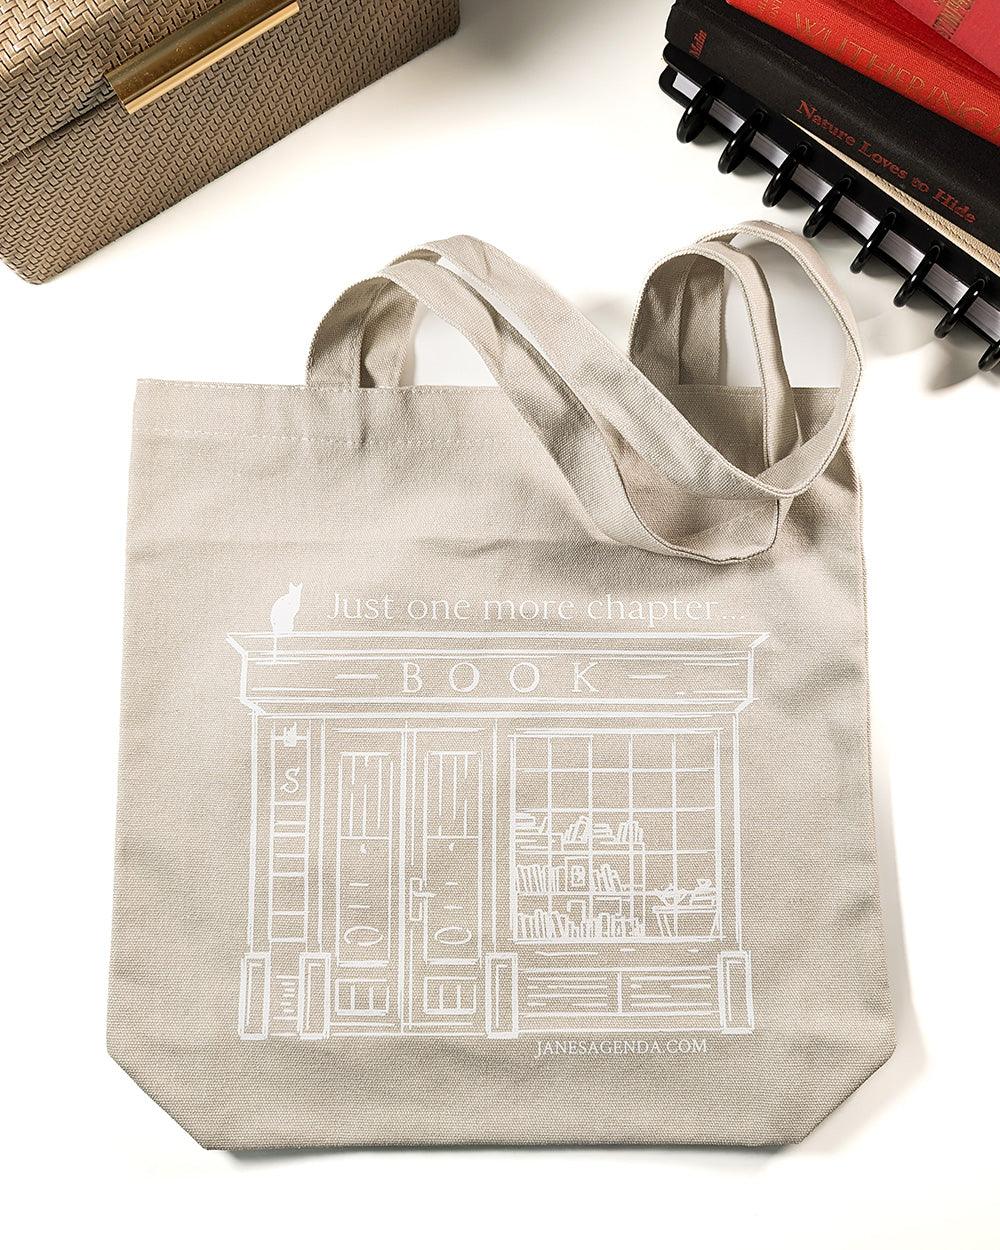 Library tote bag with a cute image and quote by Jane's Agenda.